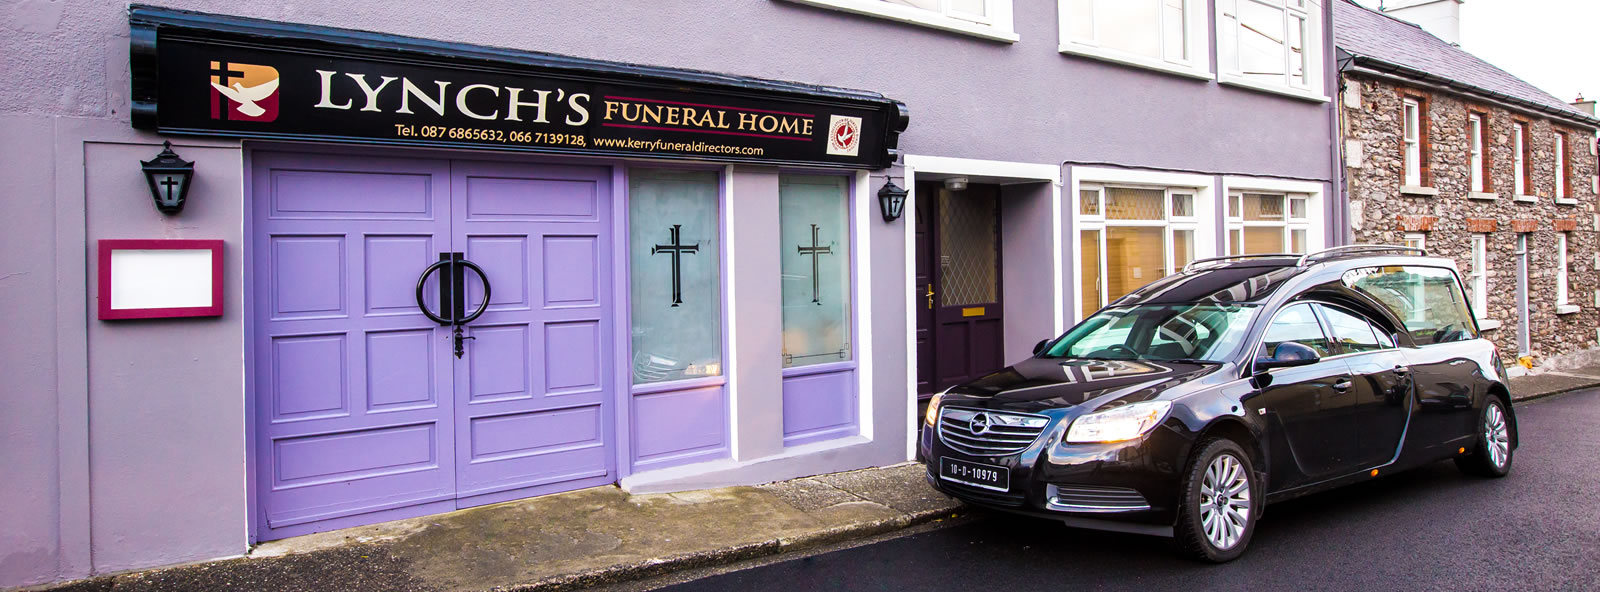 Funeral Home located in Castlegregory